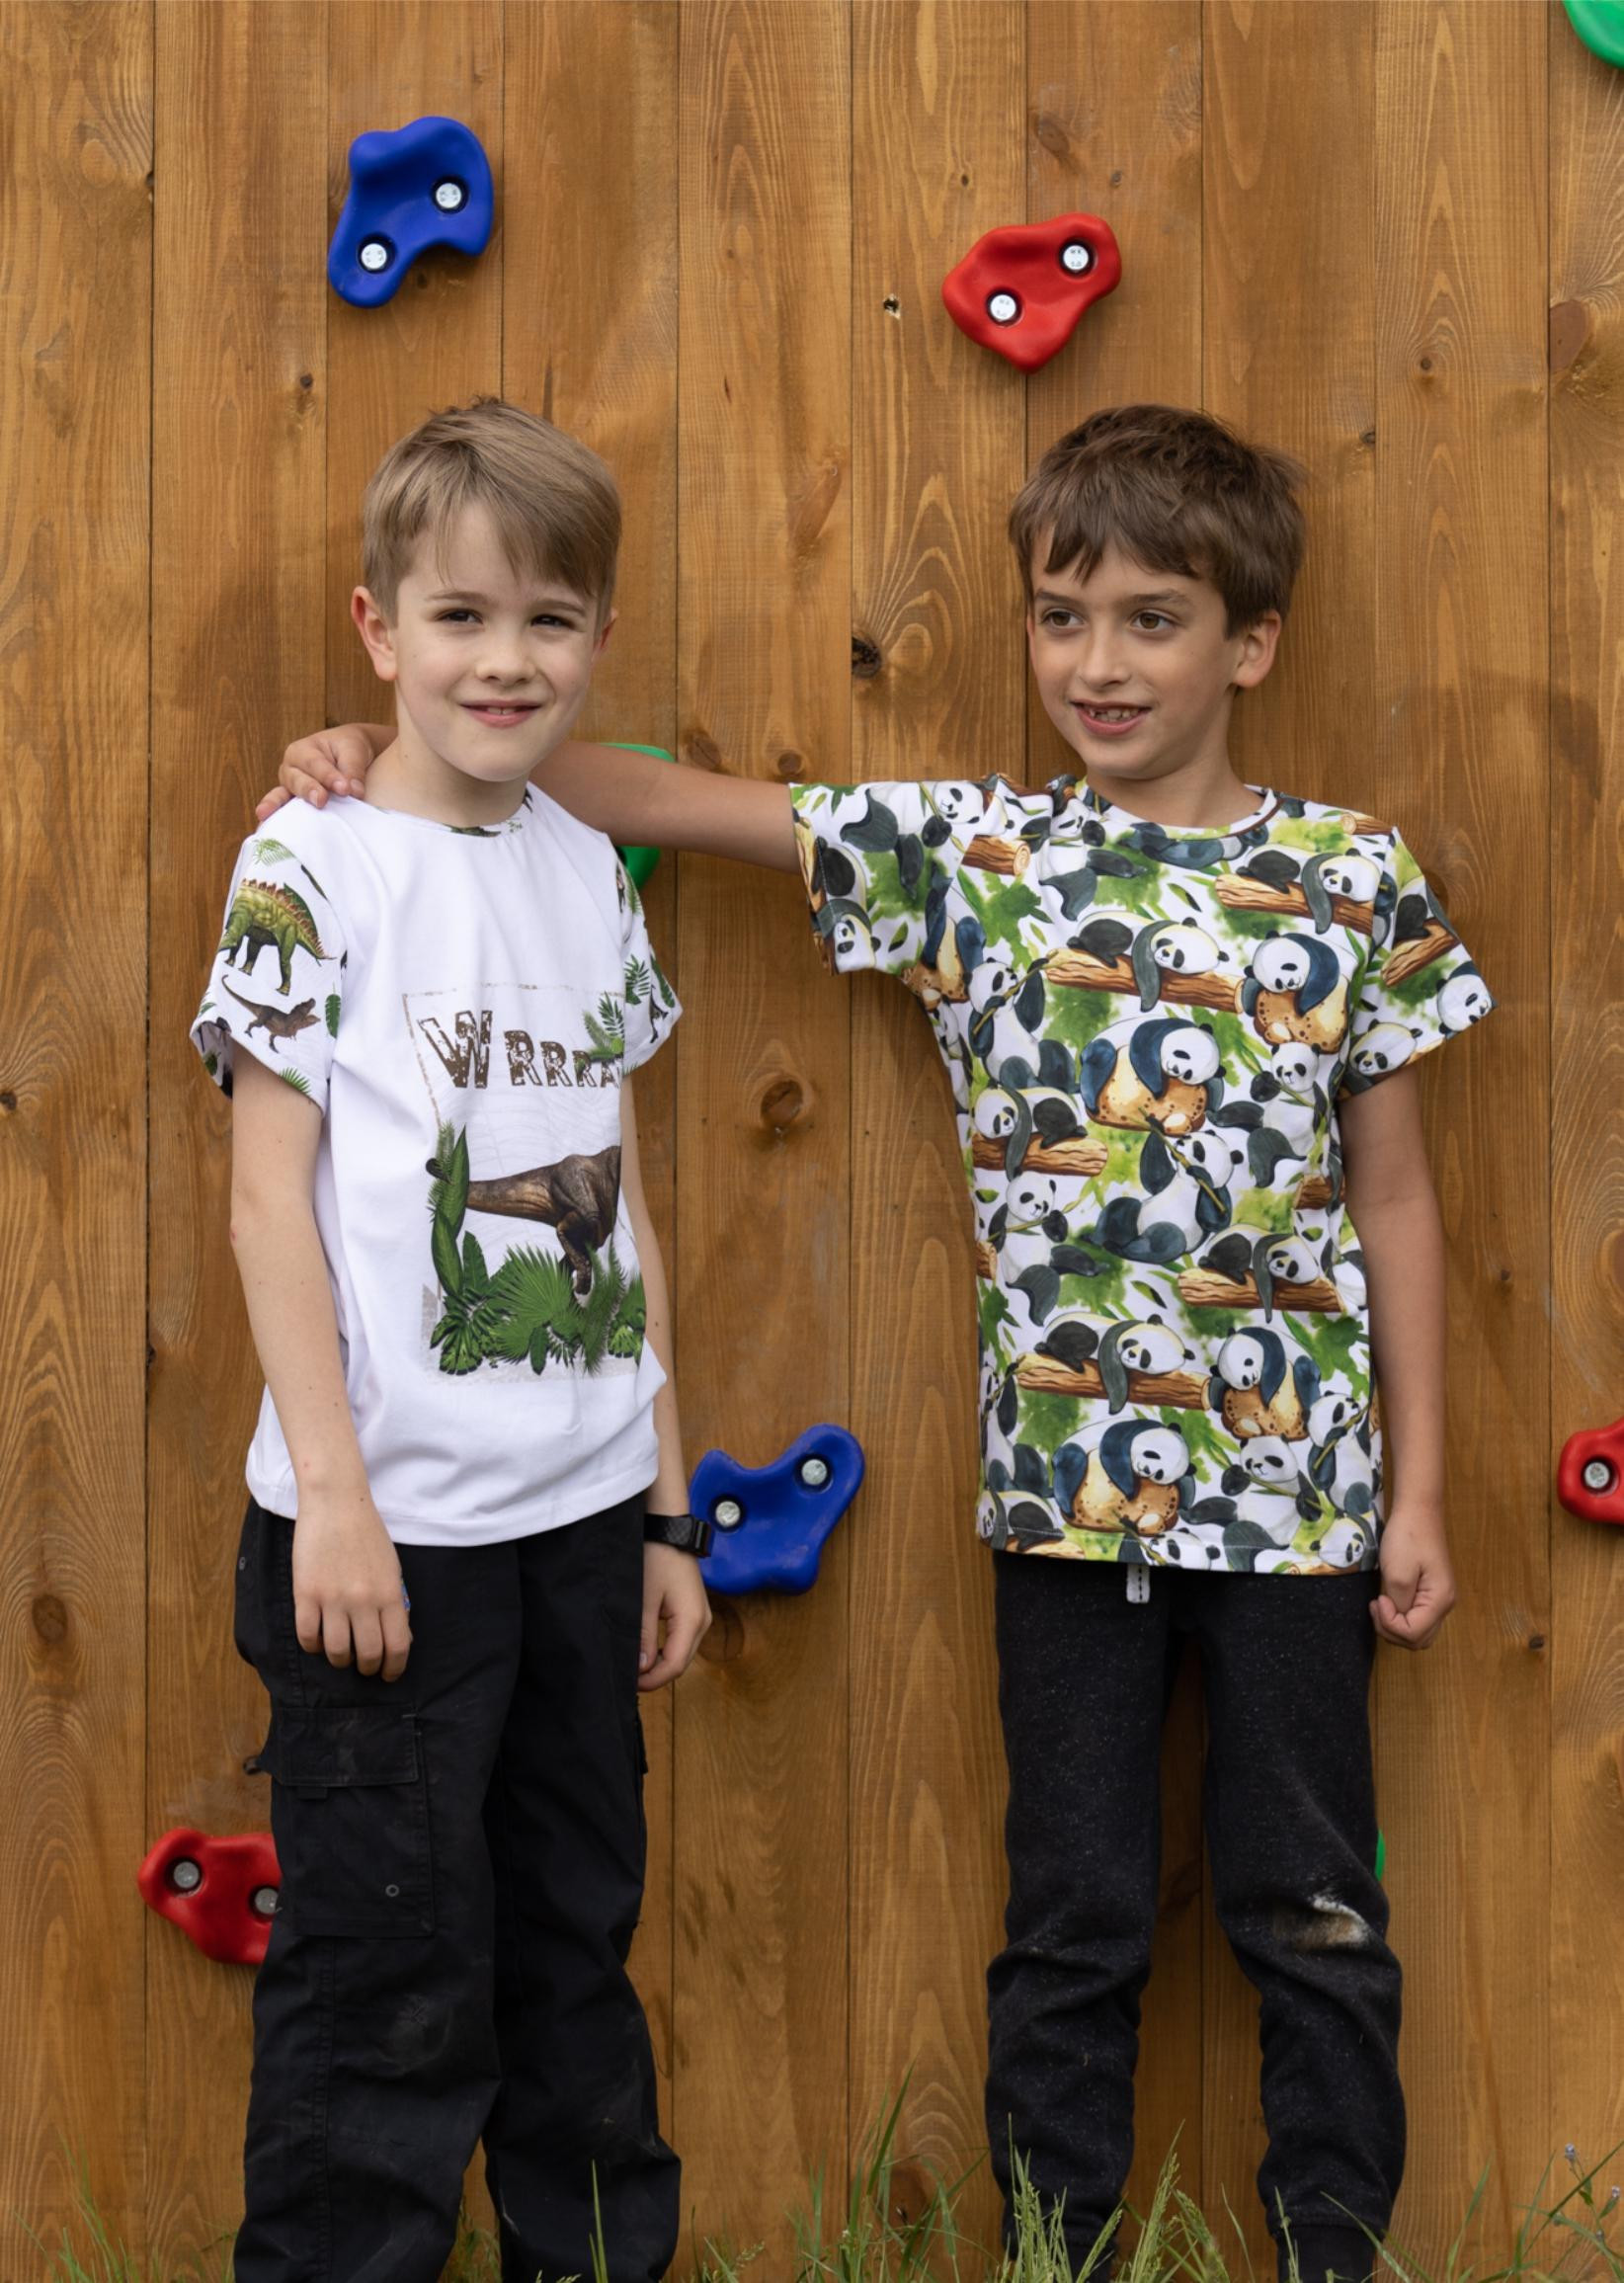 2-PACK - KID’S T-SHIRT - ROCKET AND JEEP - sewing set